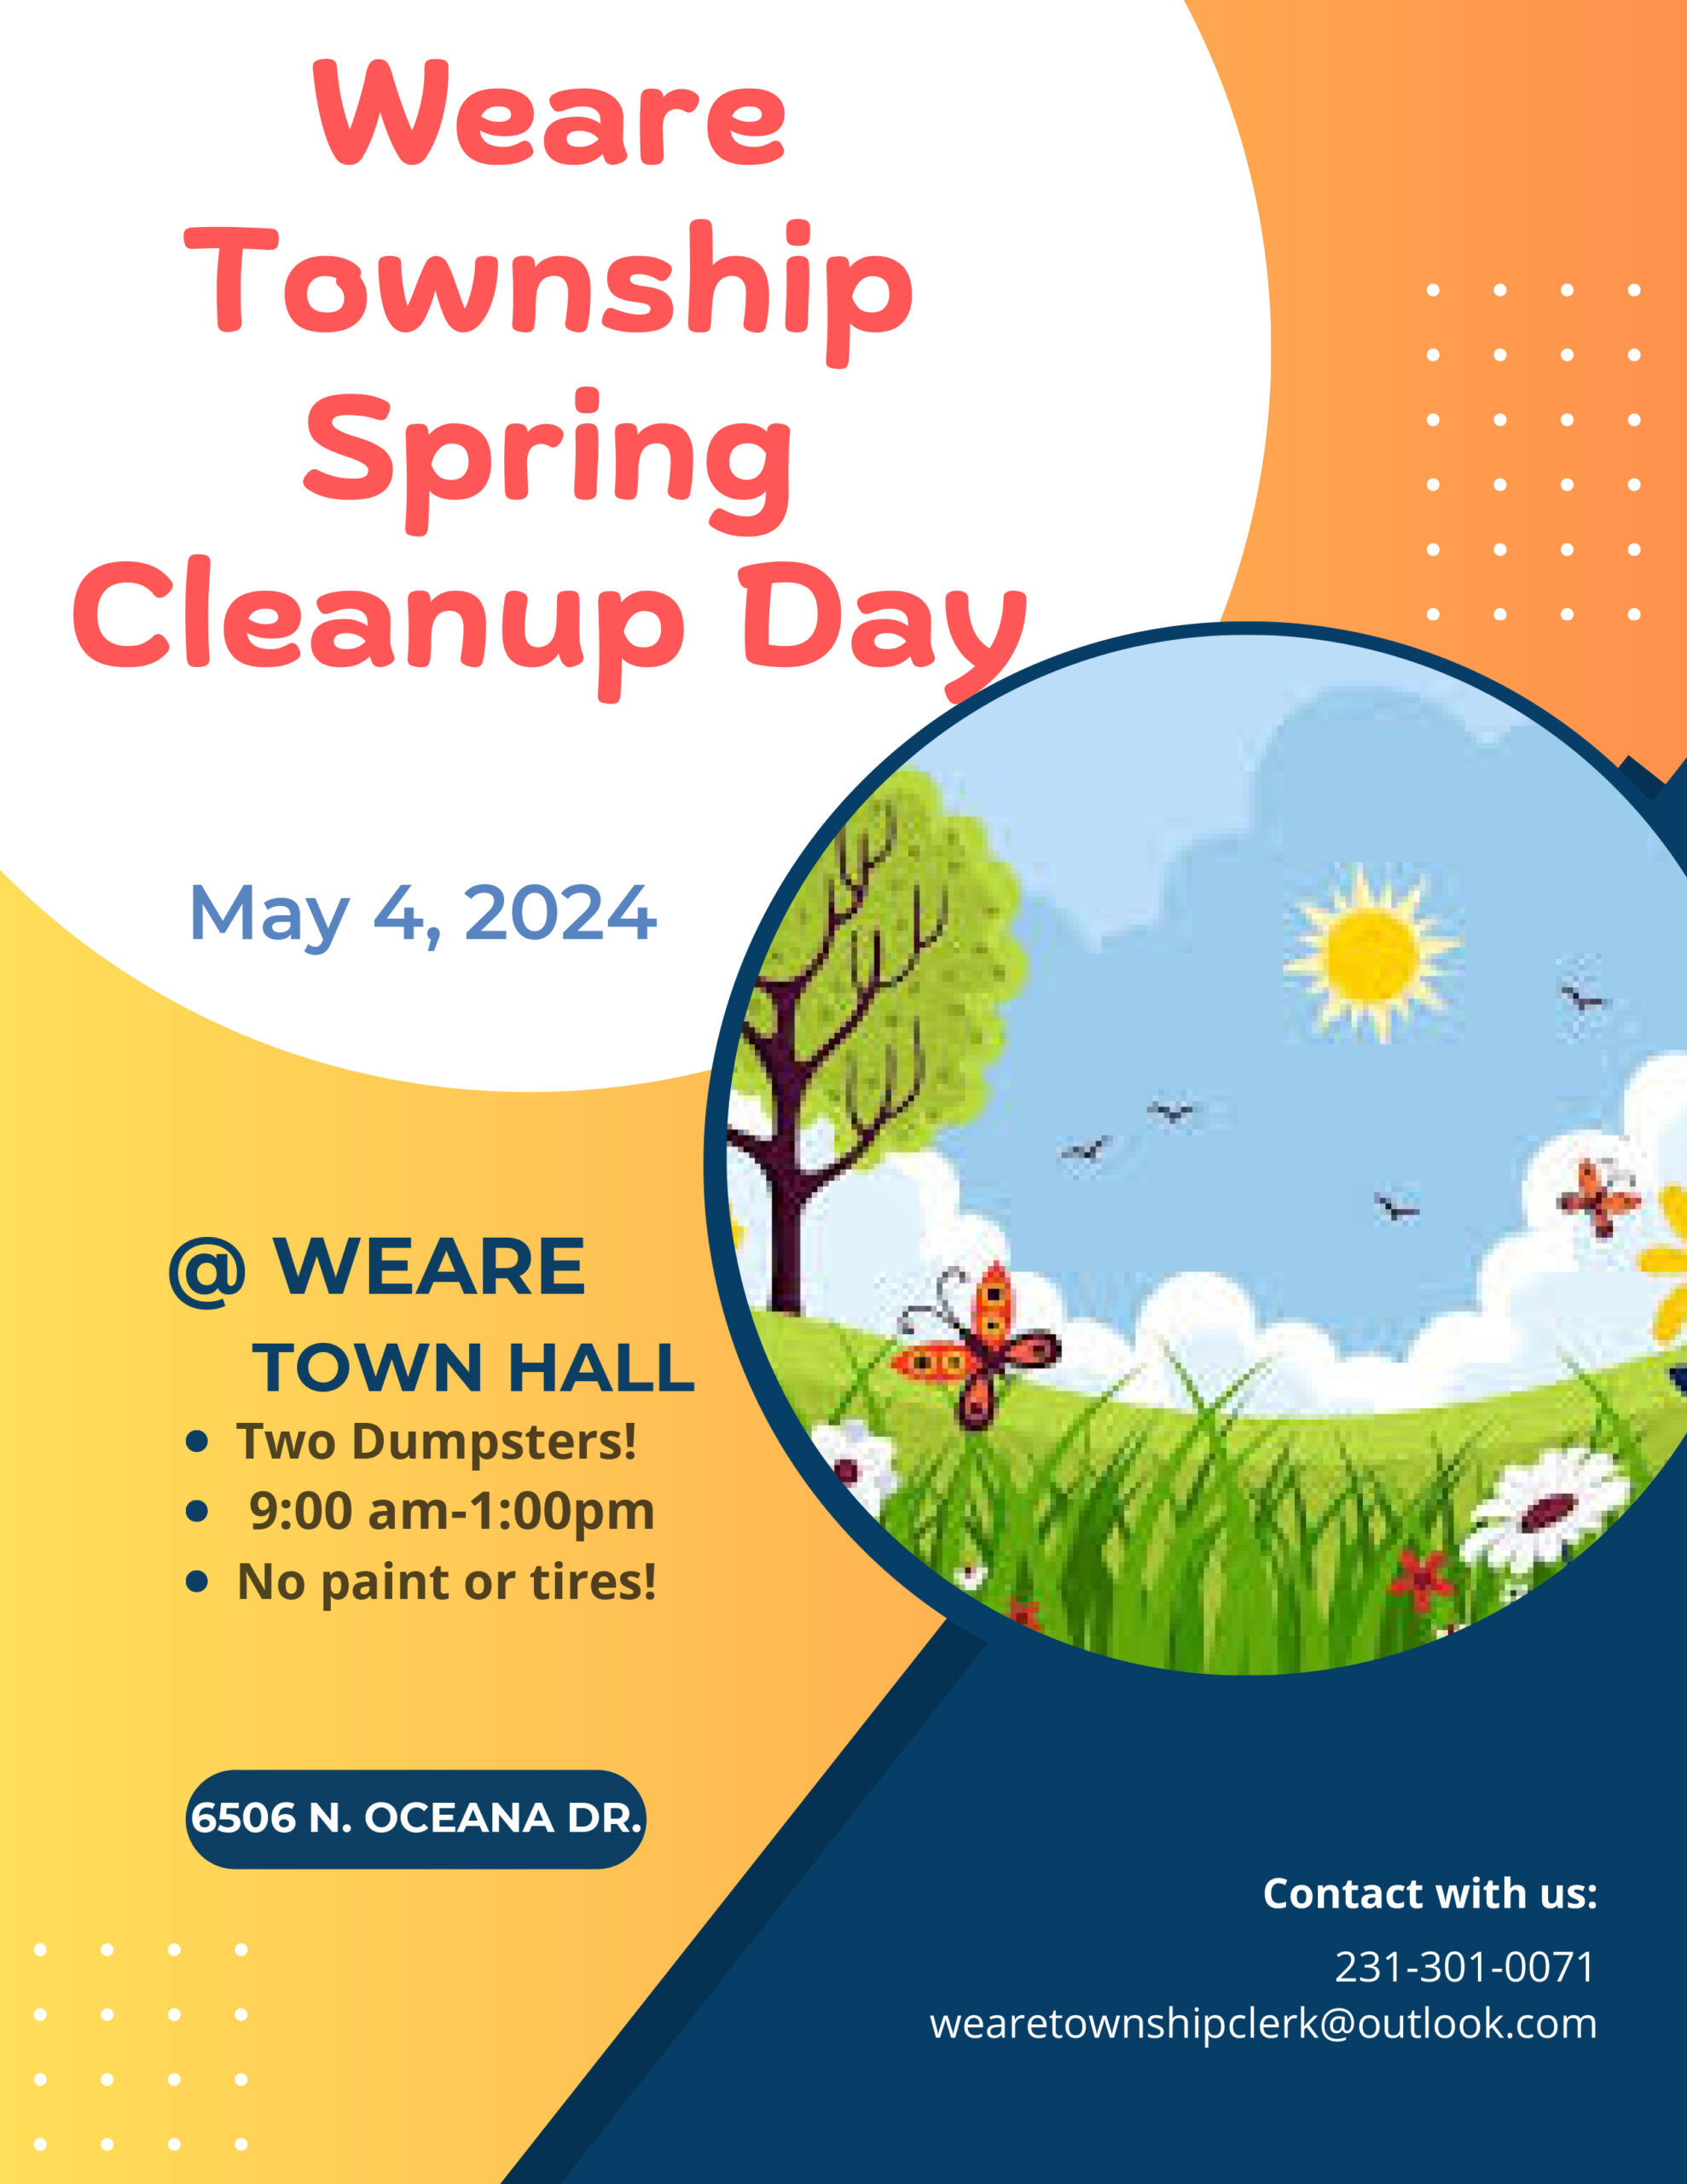 Public Notice: Weare Township Spring Cleanup Day